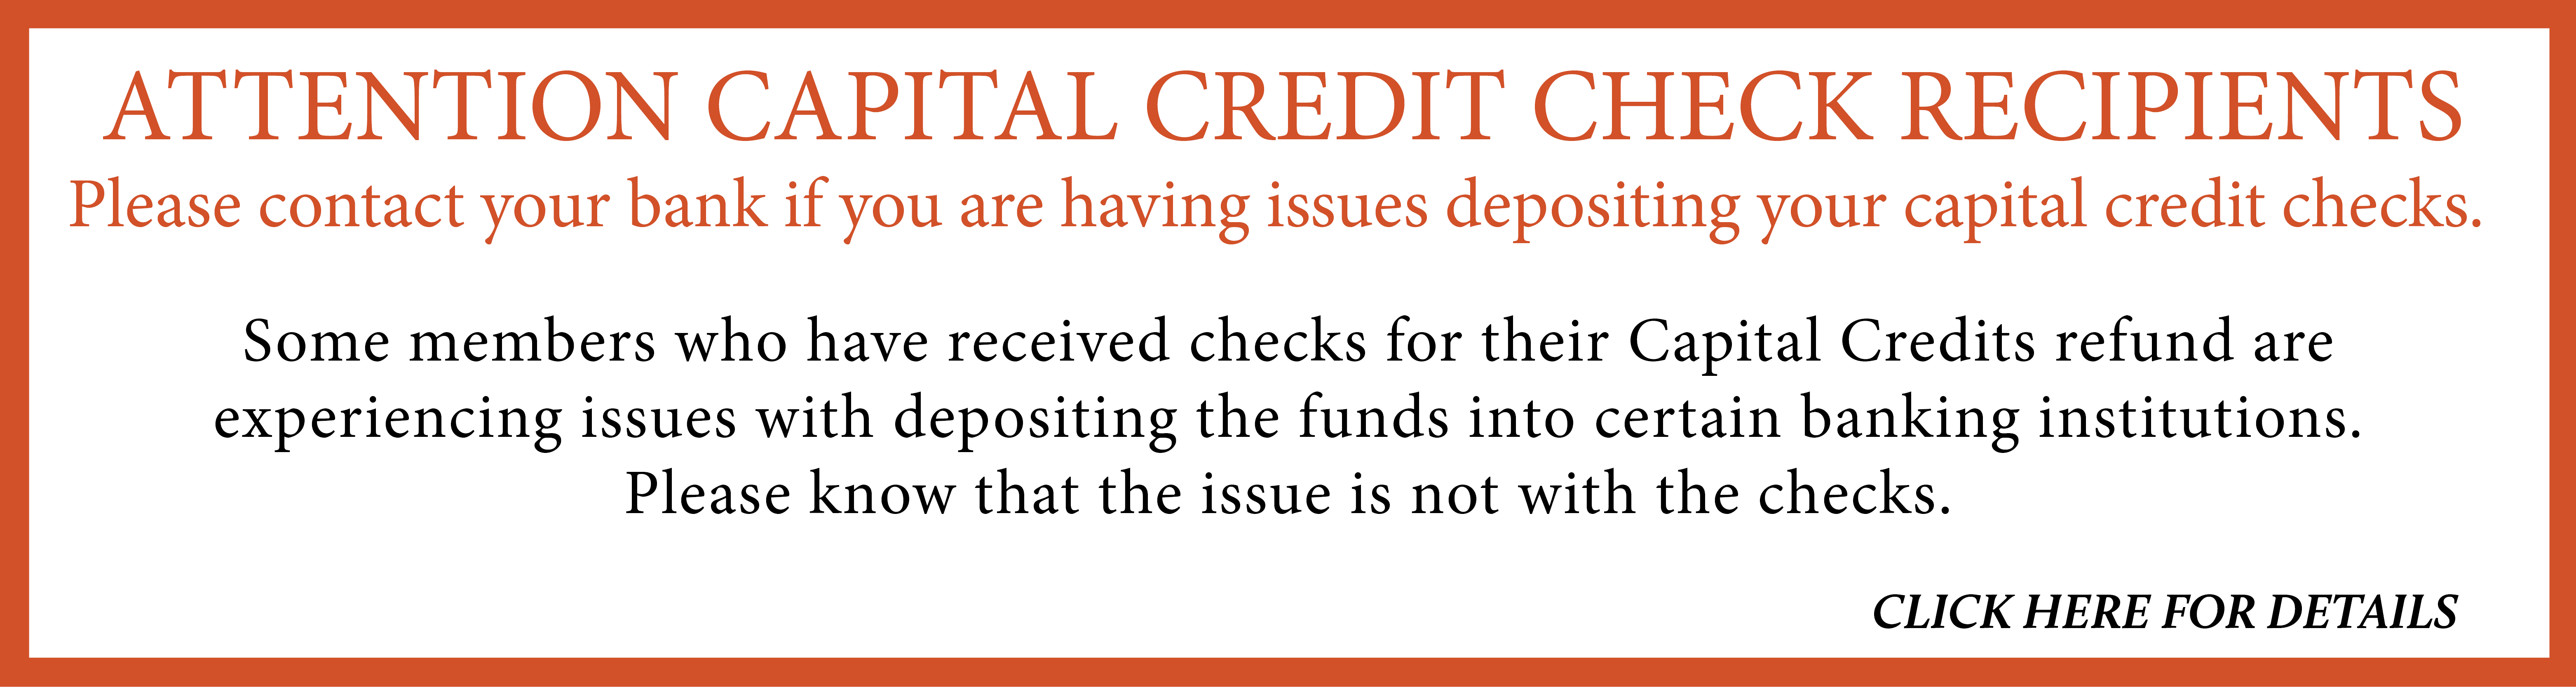 Contact Bank for Capital Credit Check Issues